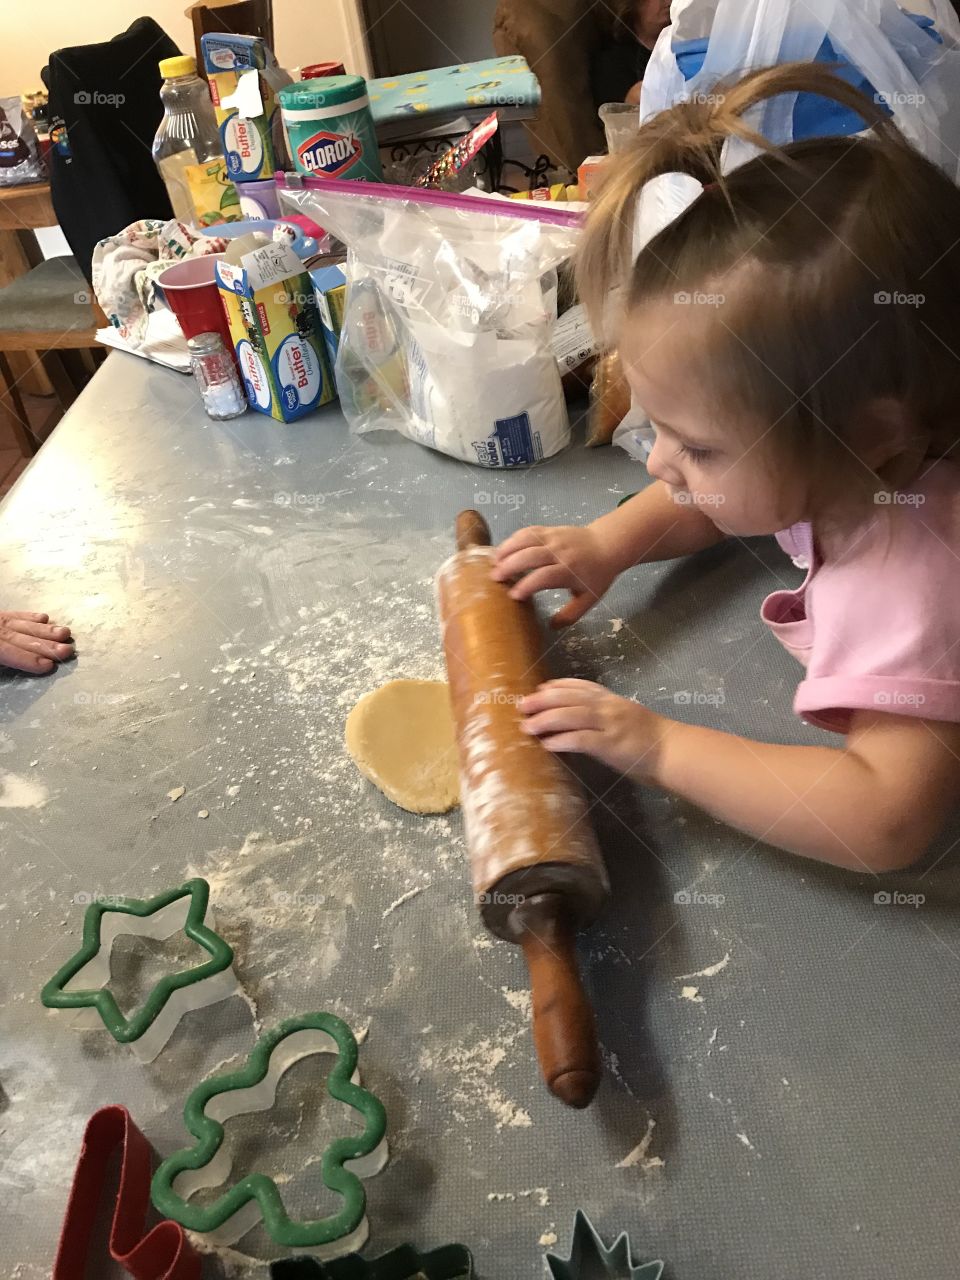 Teaching the little one to make cookies